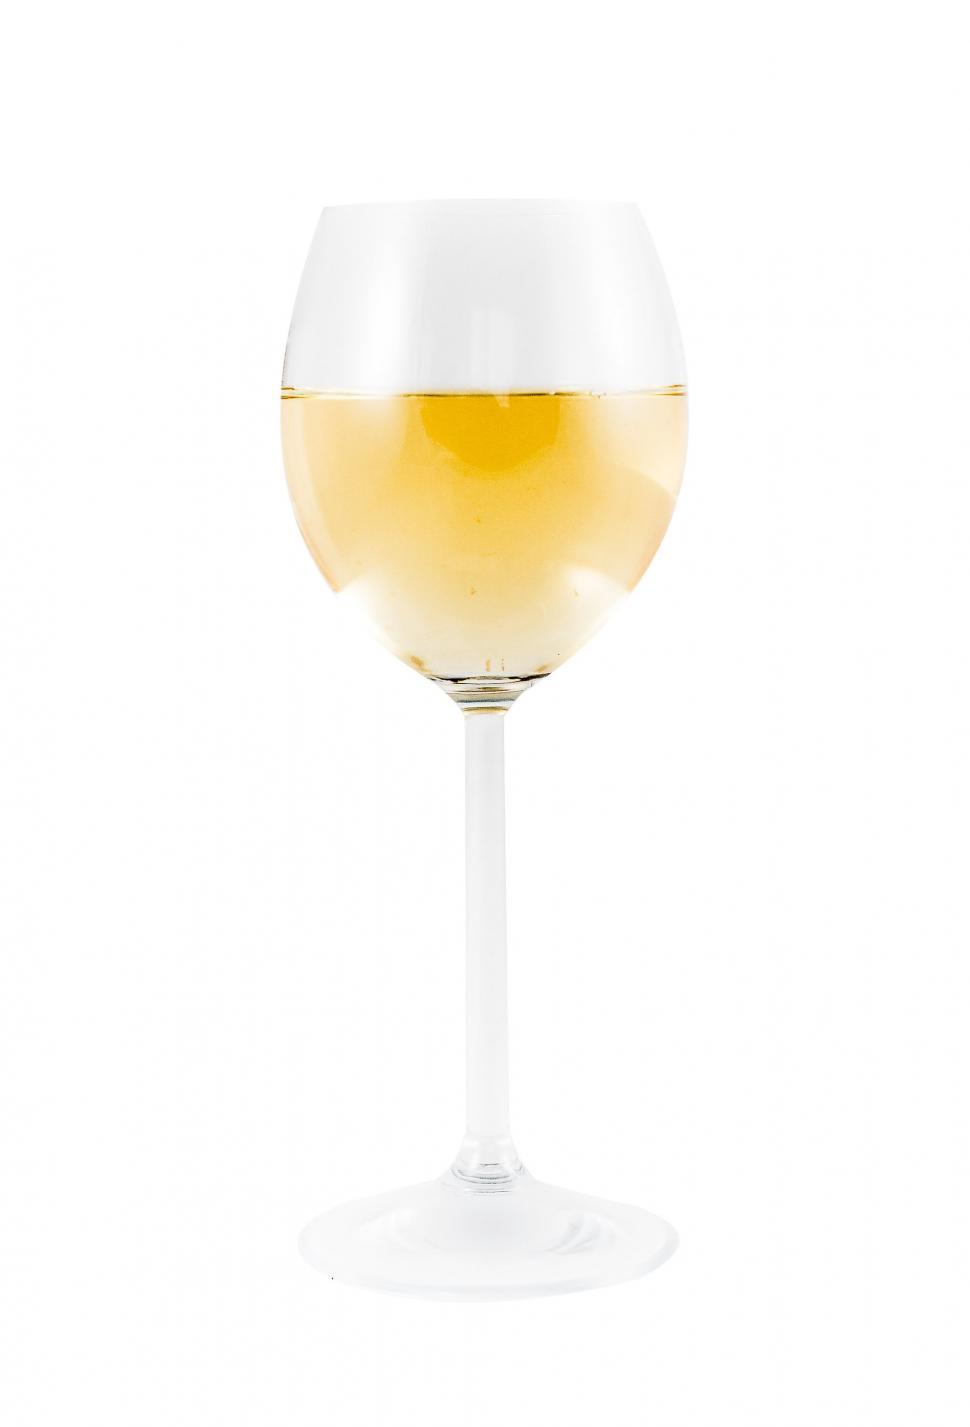 Free Image of Glass of White Wine on White Background 